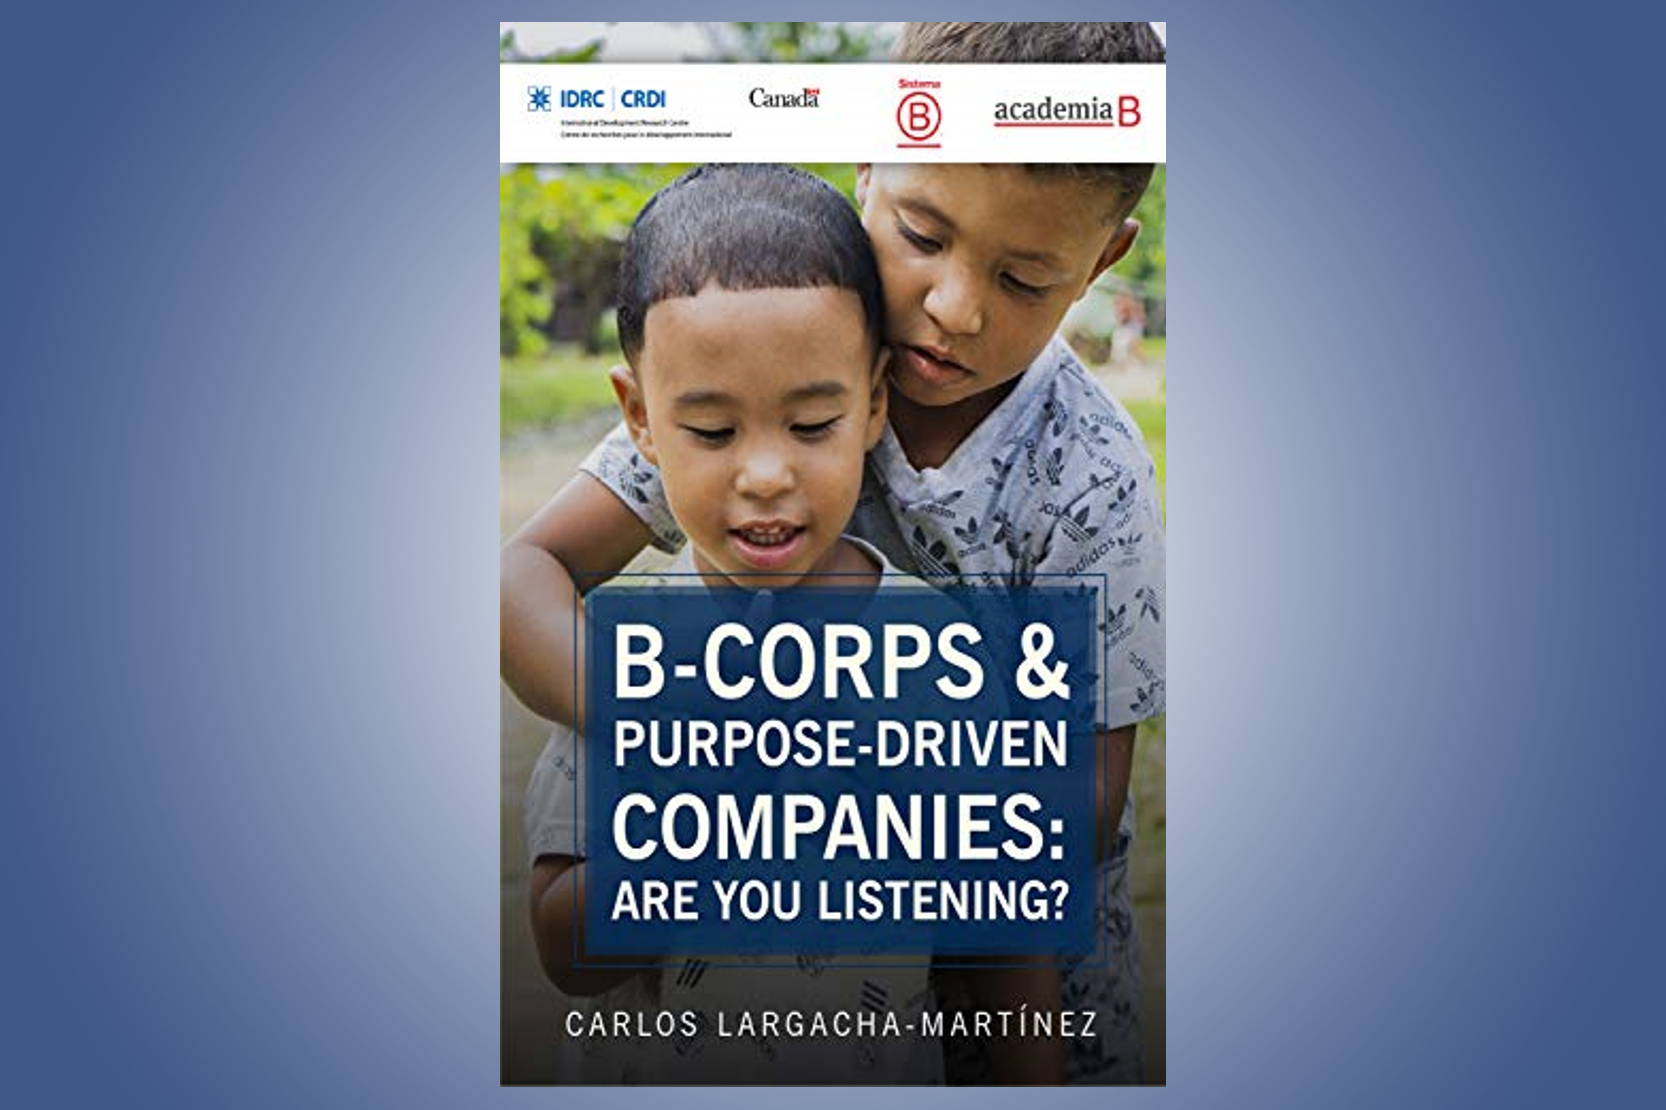 B-corps & purpose-driven companies: Are you listening?